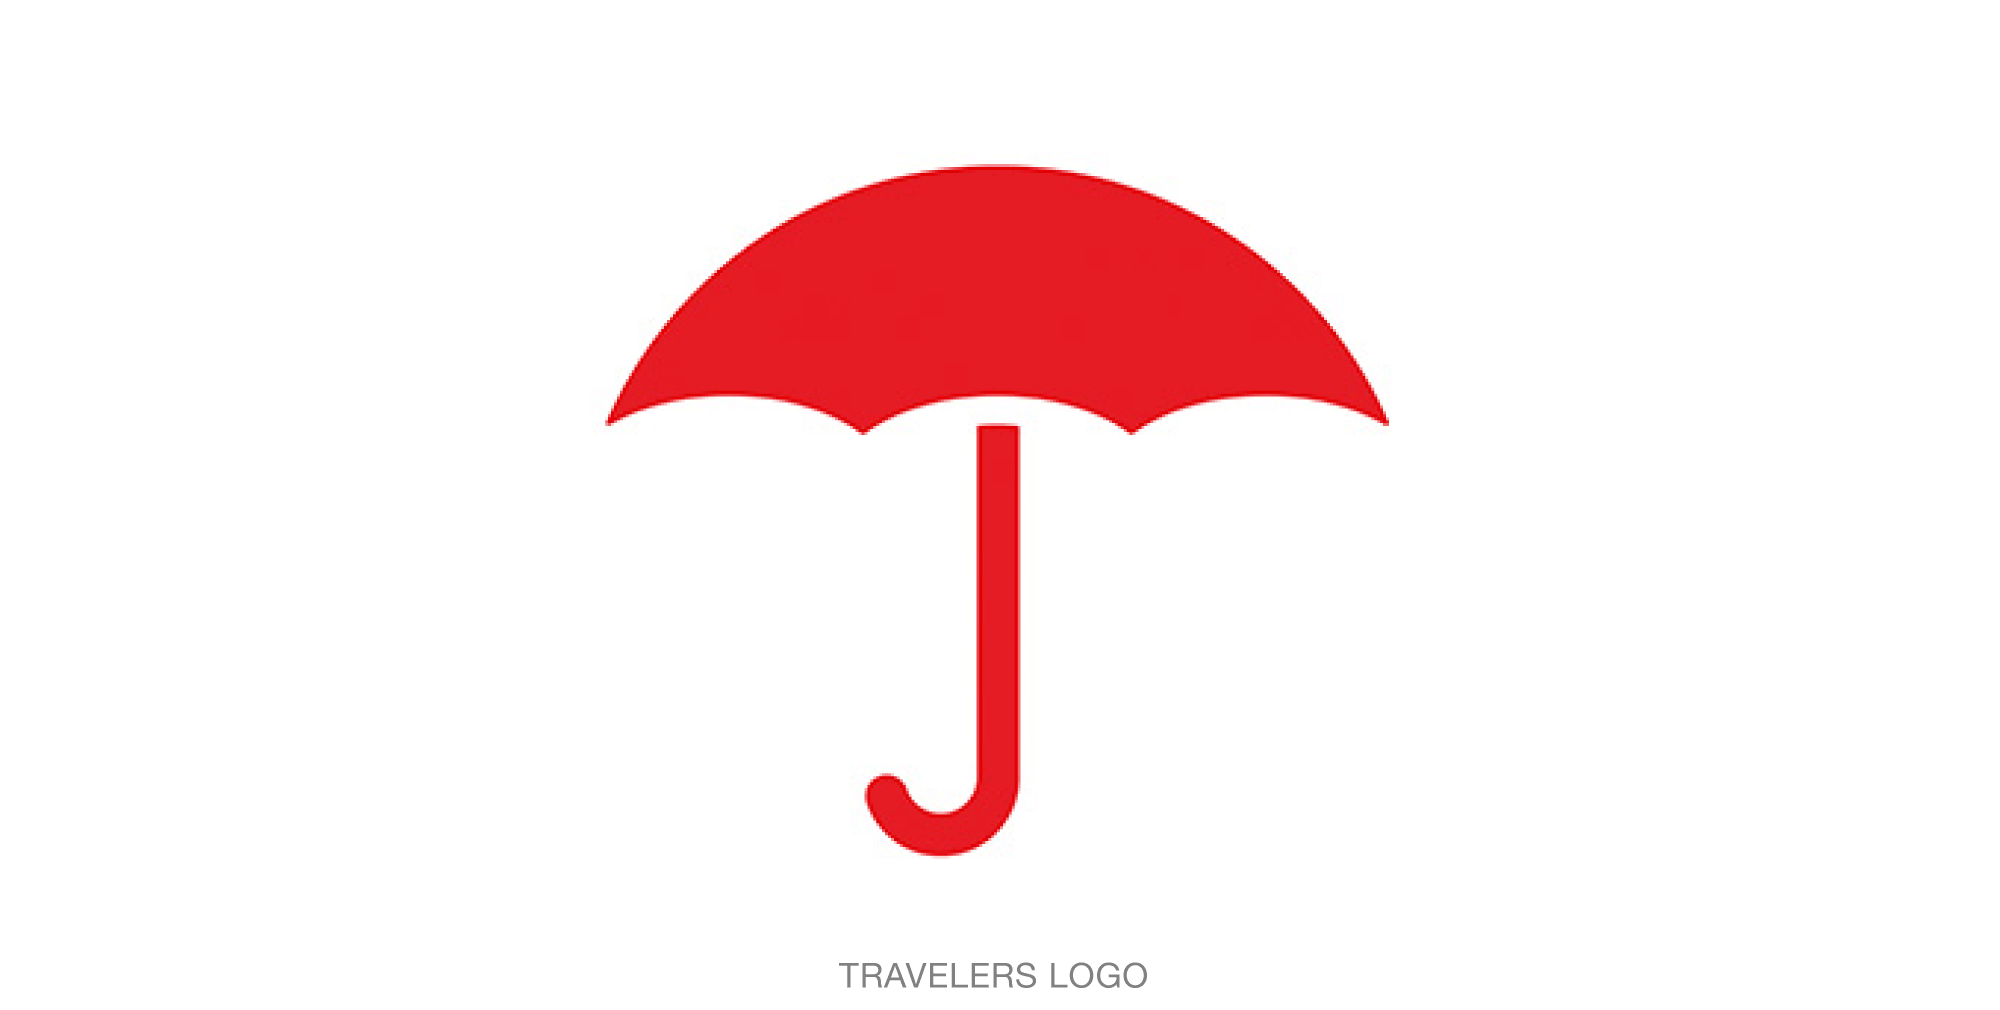 Red Umbrella Travelers Logo - Travelers Sees Red